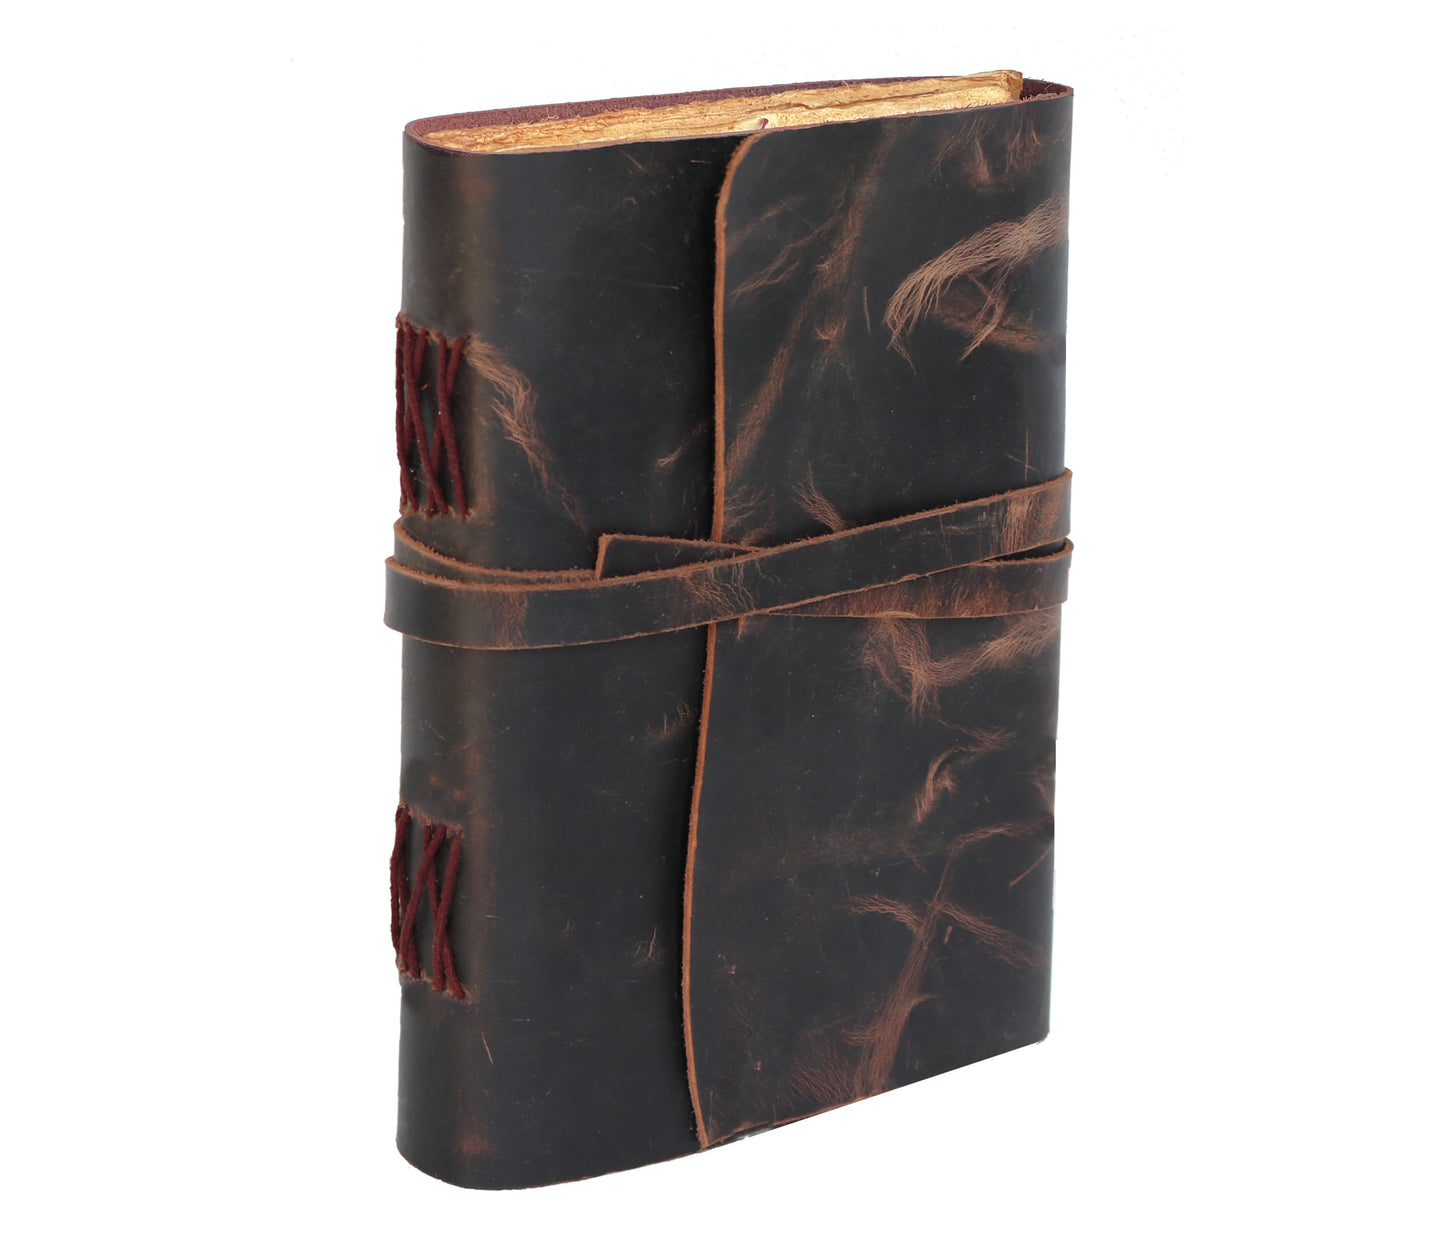 Book Of Shadows with Deckle Edged Paper